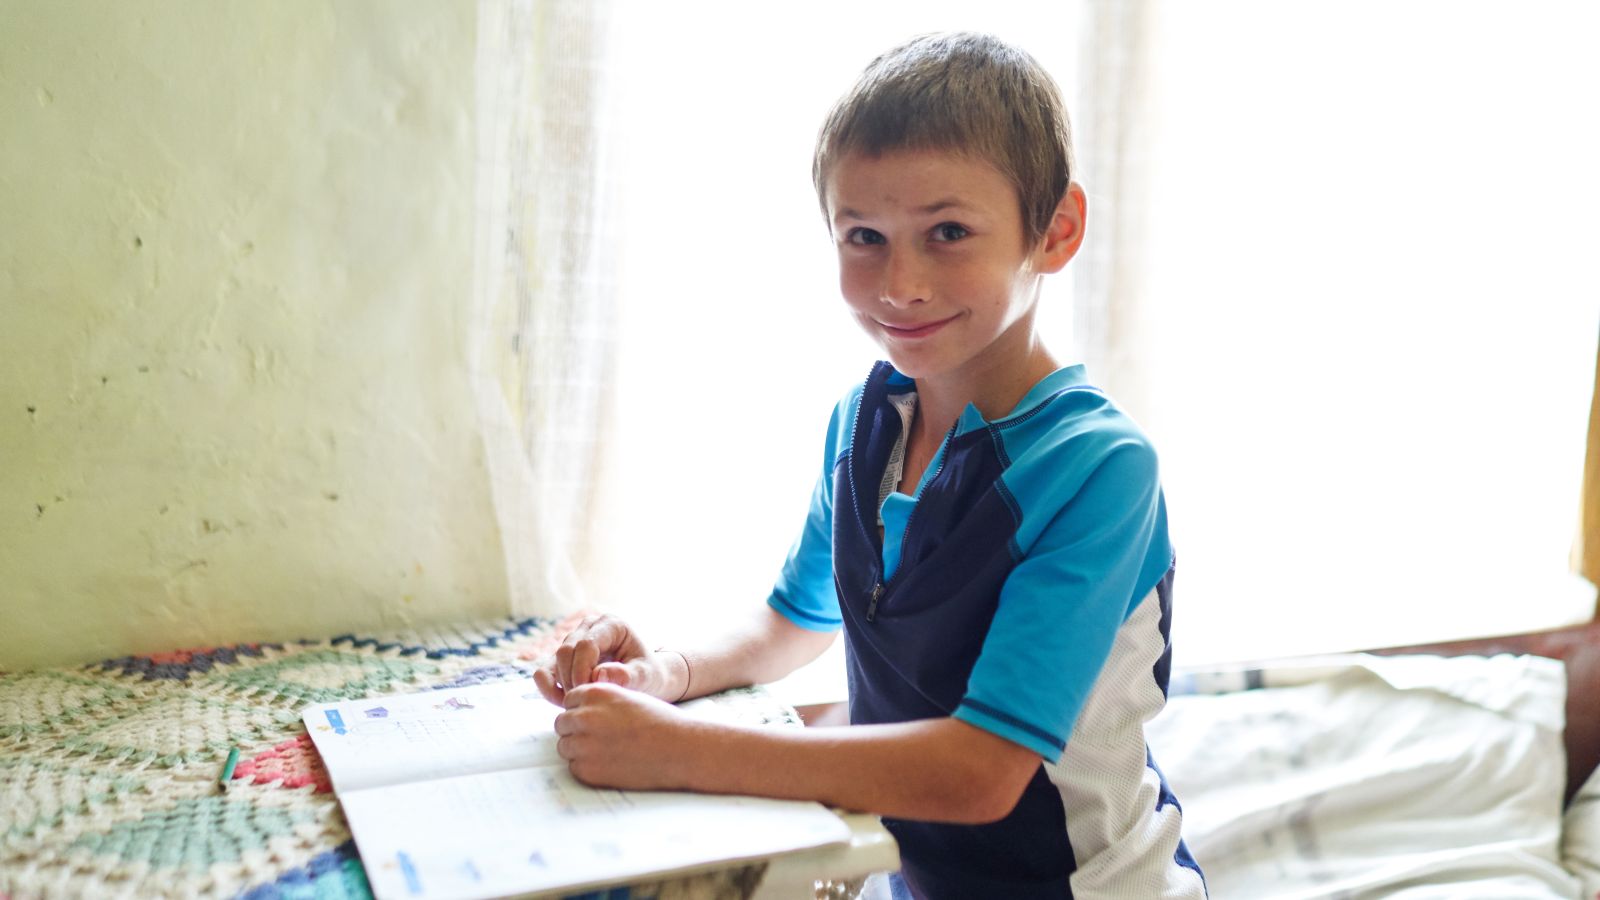 Help Ionuț and other vulnerable children like him